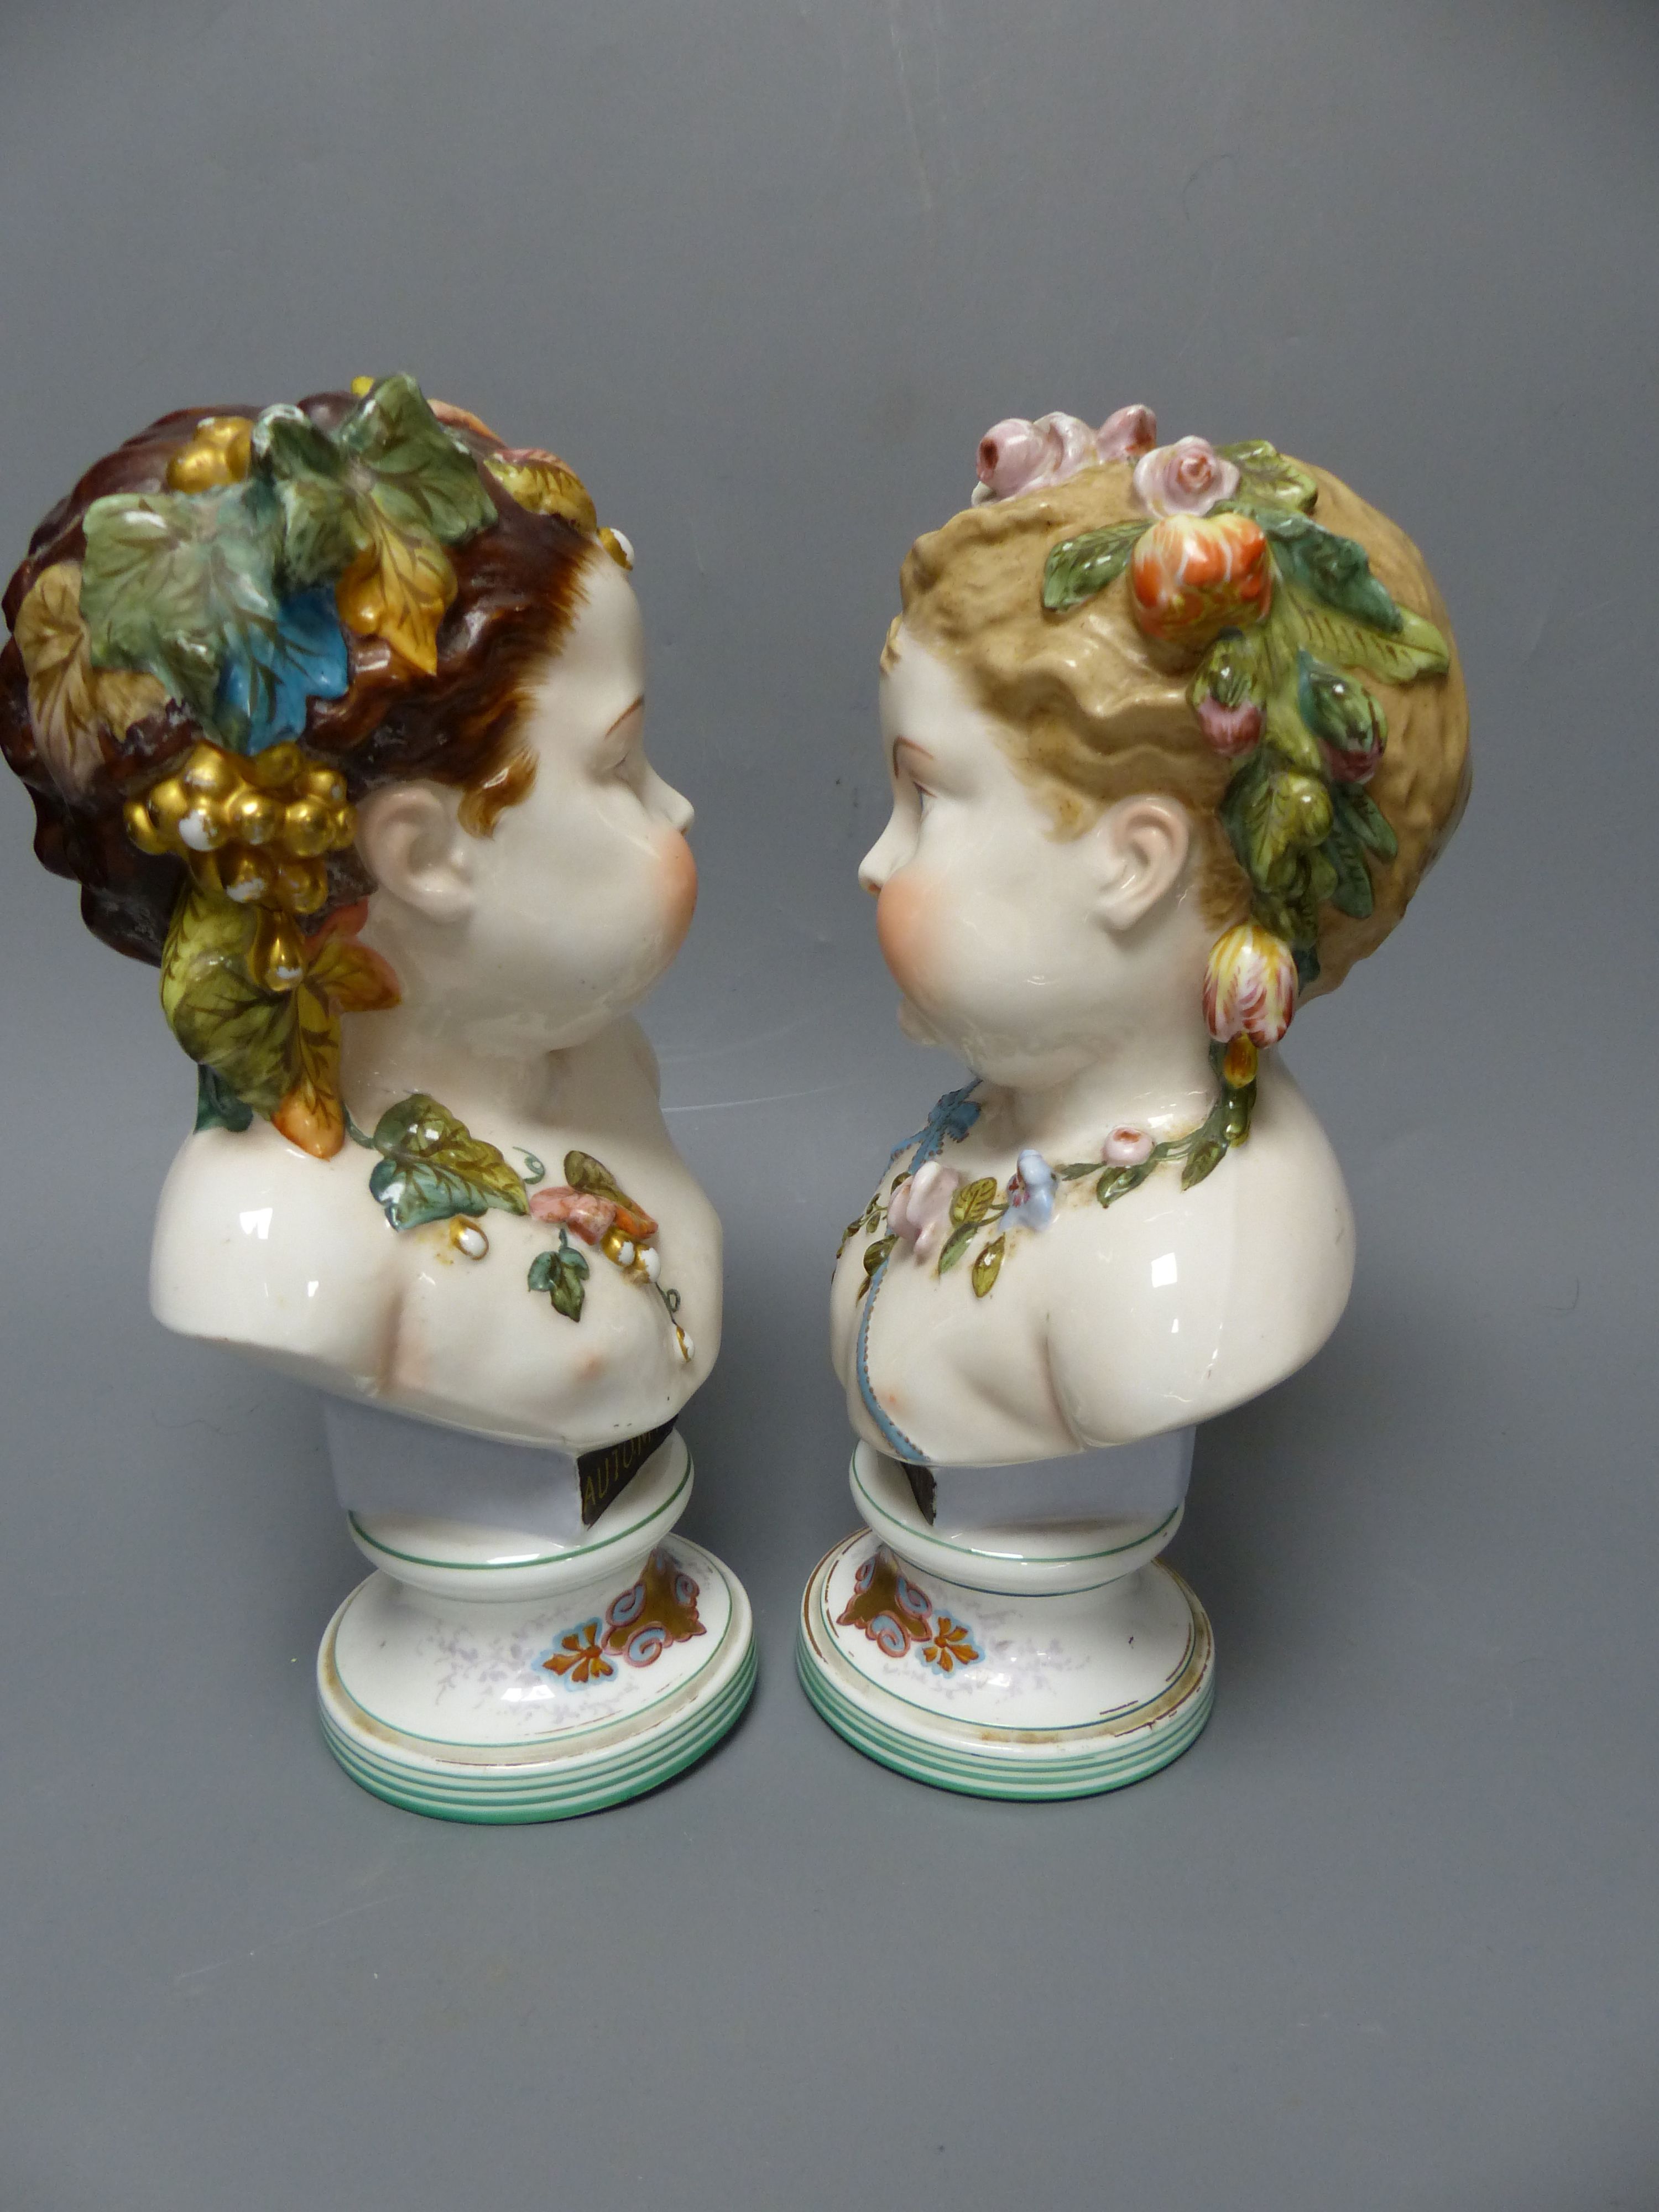 A pair of French porcelain busts Automne and Printemps, a Samson ewer and basin in the Chinese export style and a pair Belleek styl